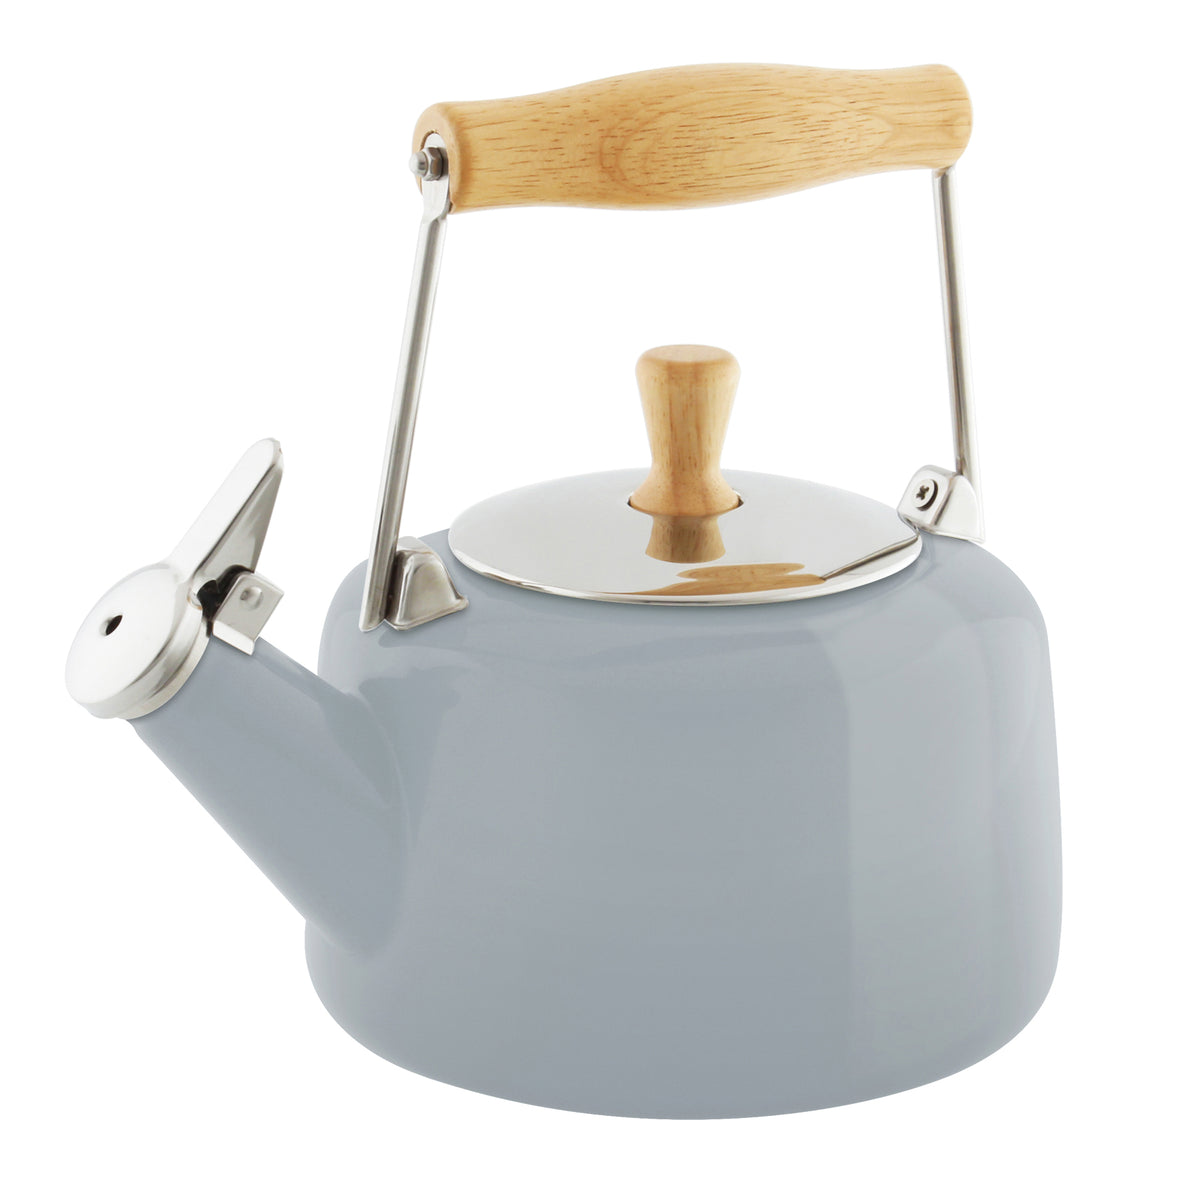 Retro Tea Kettle - Large  Polder Products UK - life.style.solutions